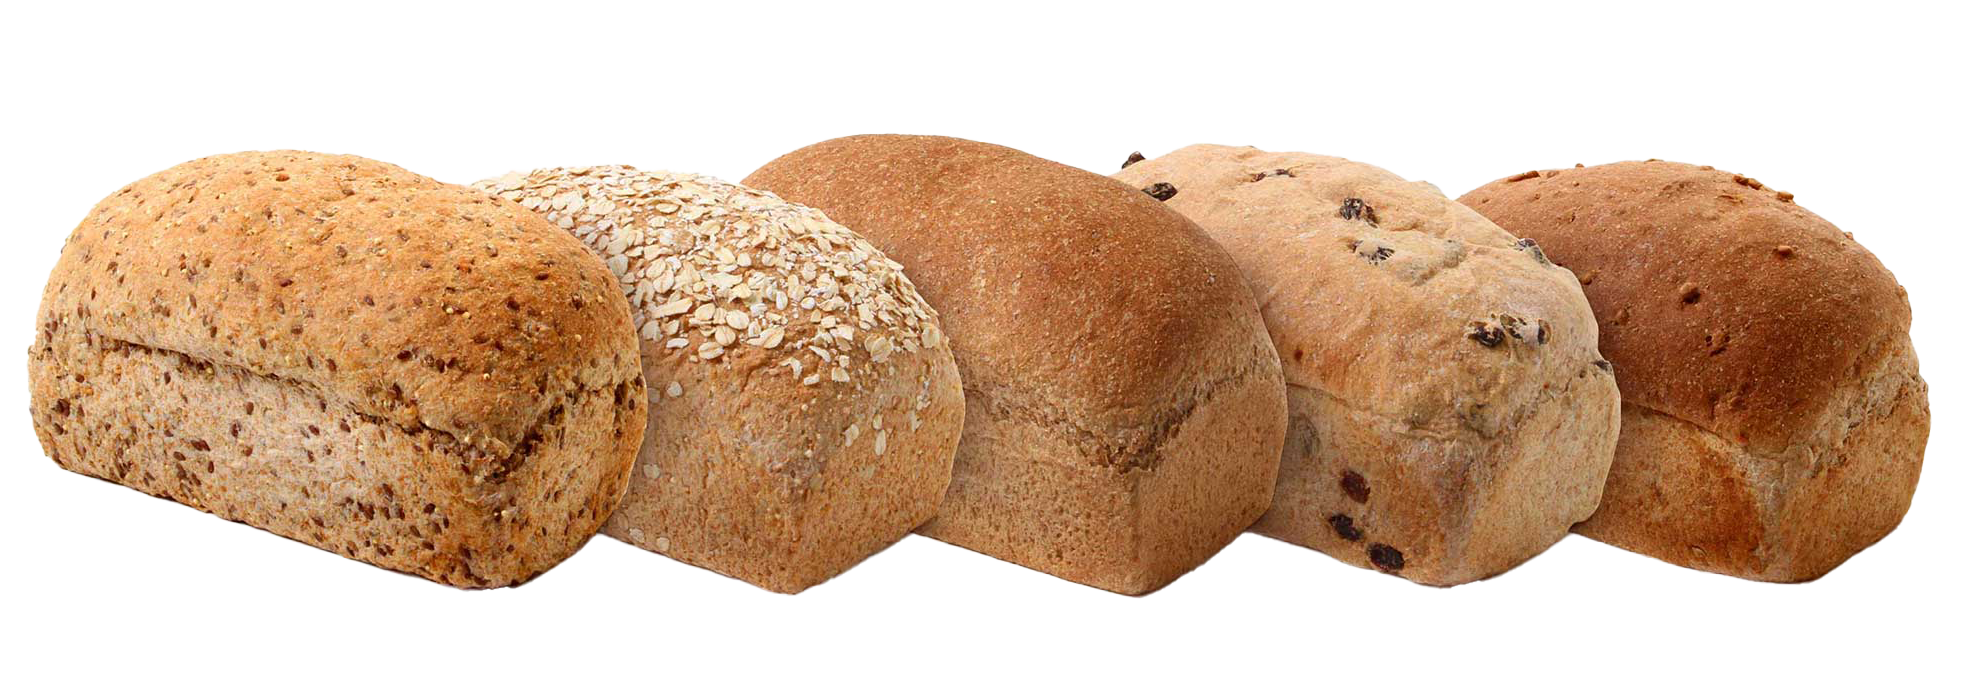 Slices of Great Harvest's bread variations.